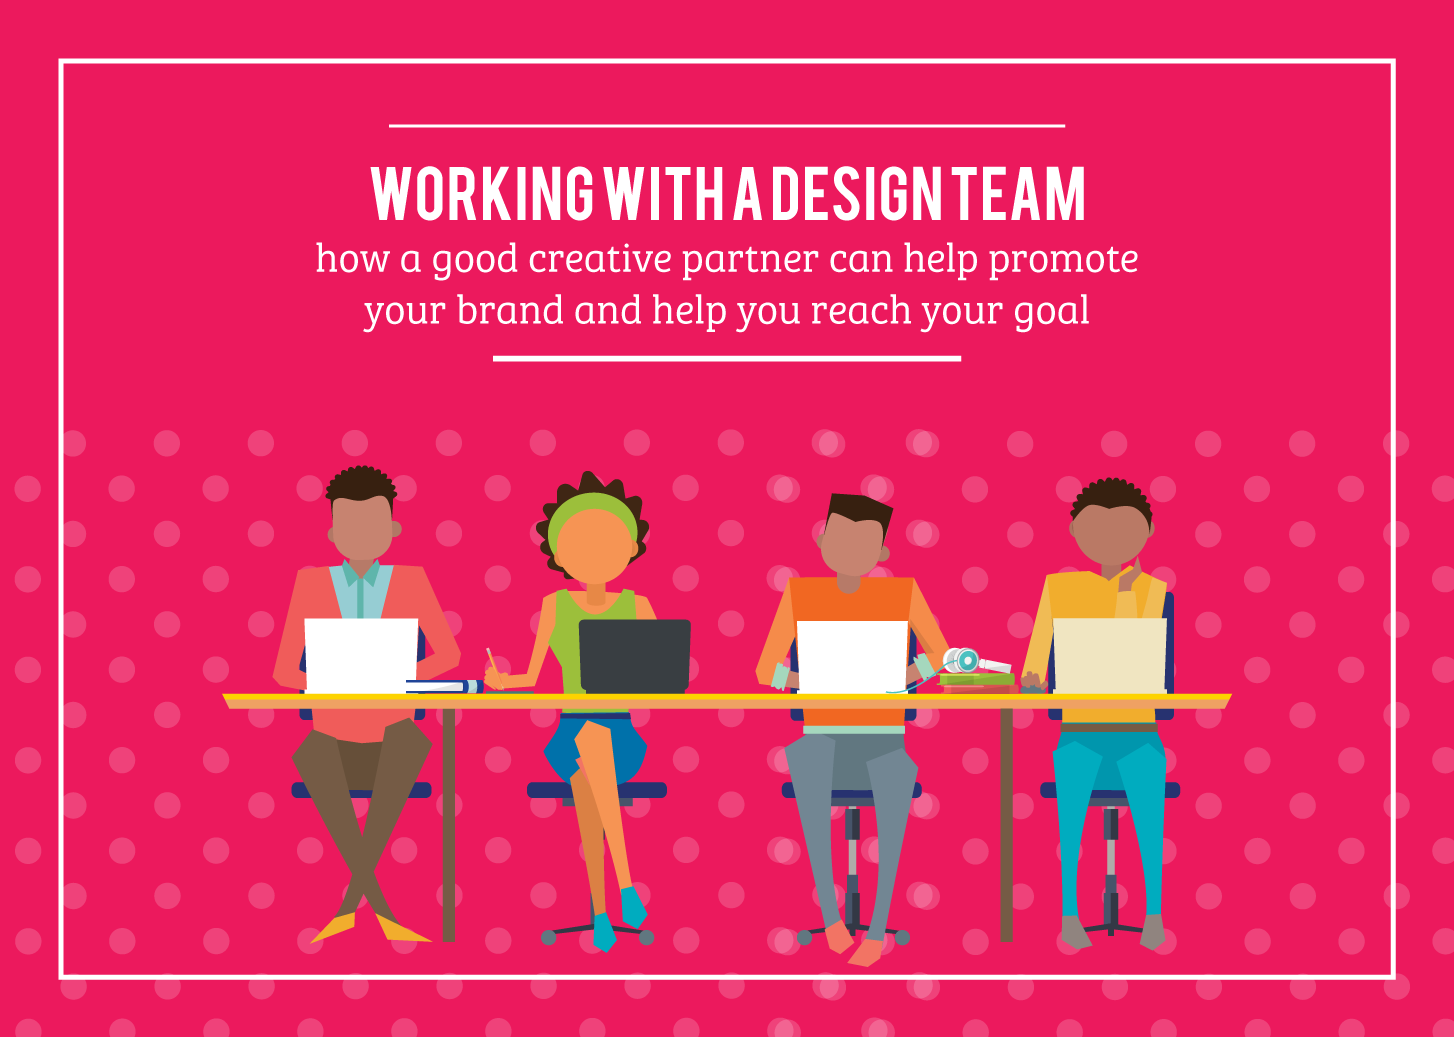 Working with a Creative team – how a good creative partner can help promote your brand and help you reach your goal